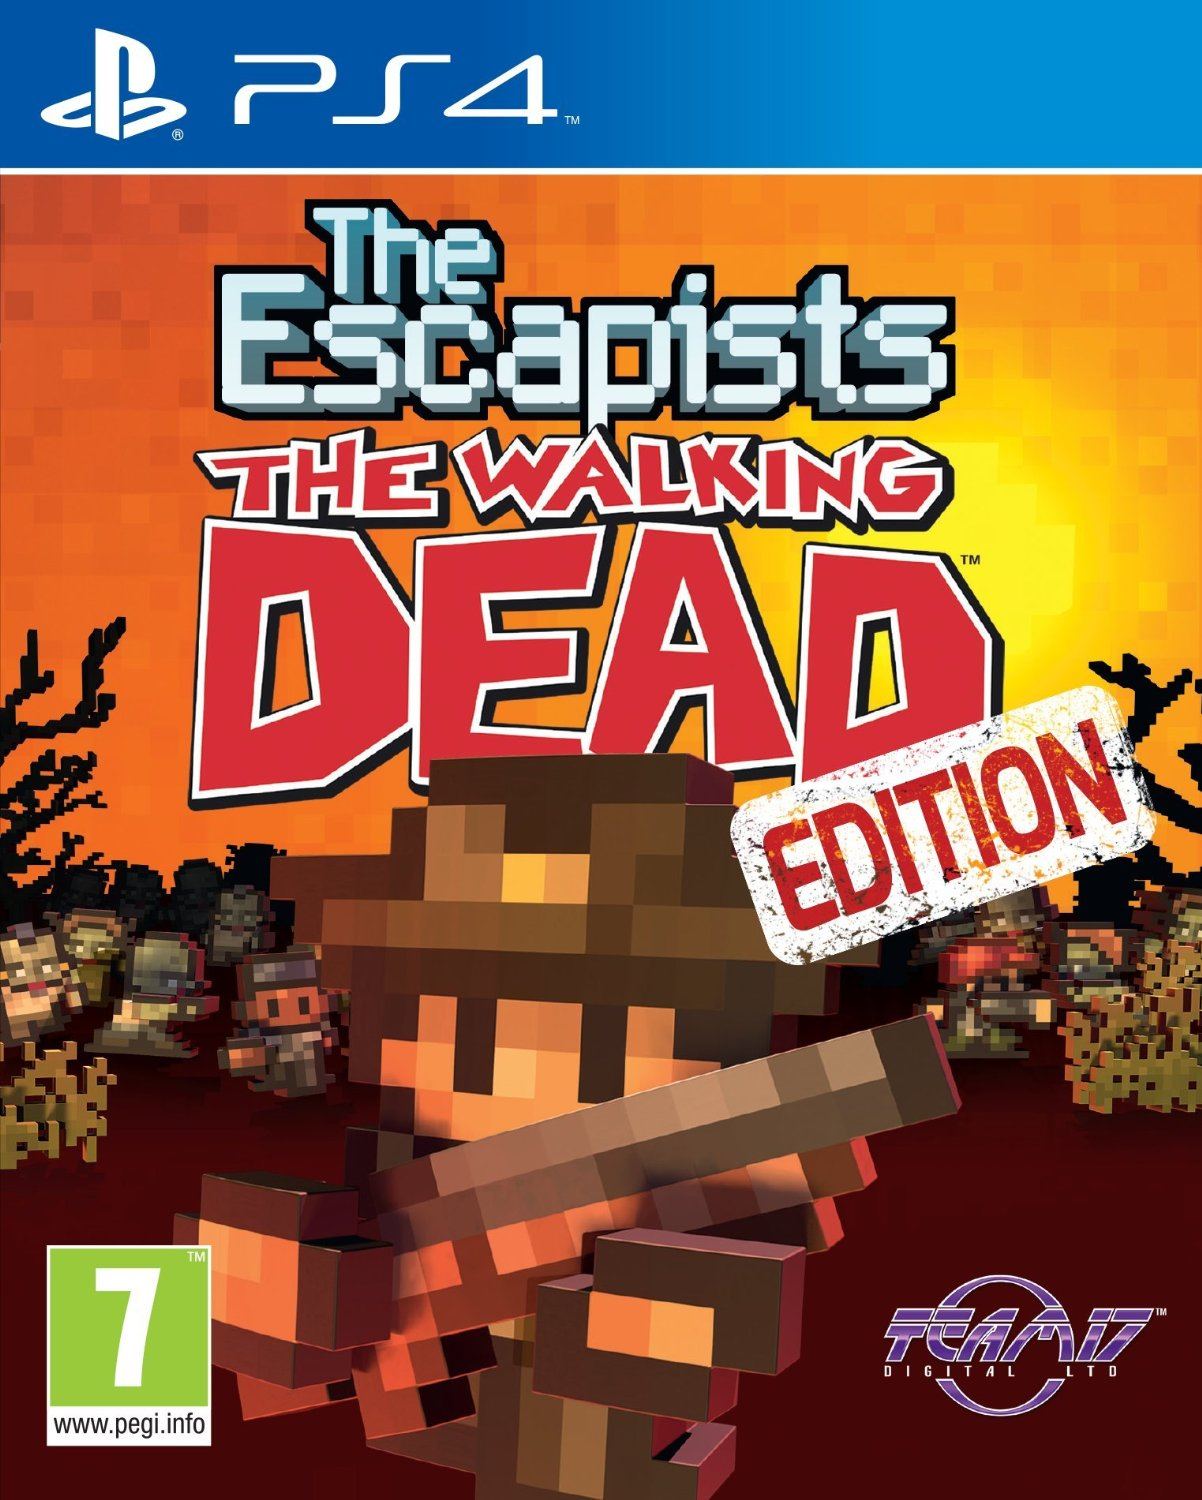 http://s.pacn.ws/640/p5/the-escapists-the-walking-dead-452517.1.jpg?o153aw